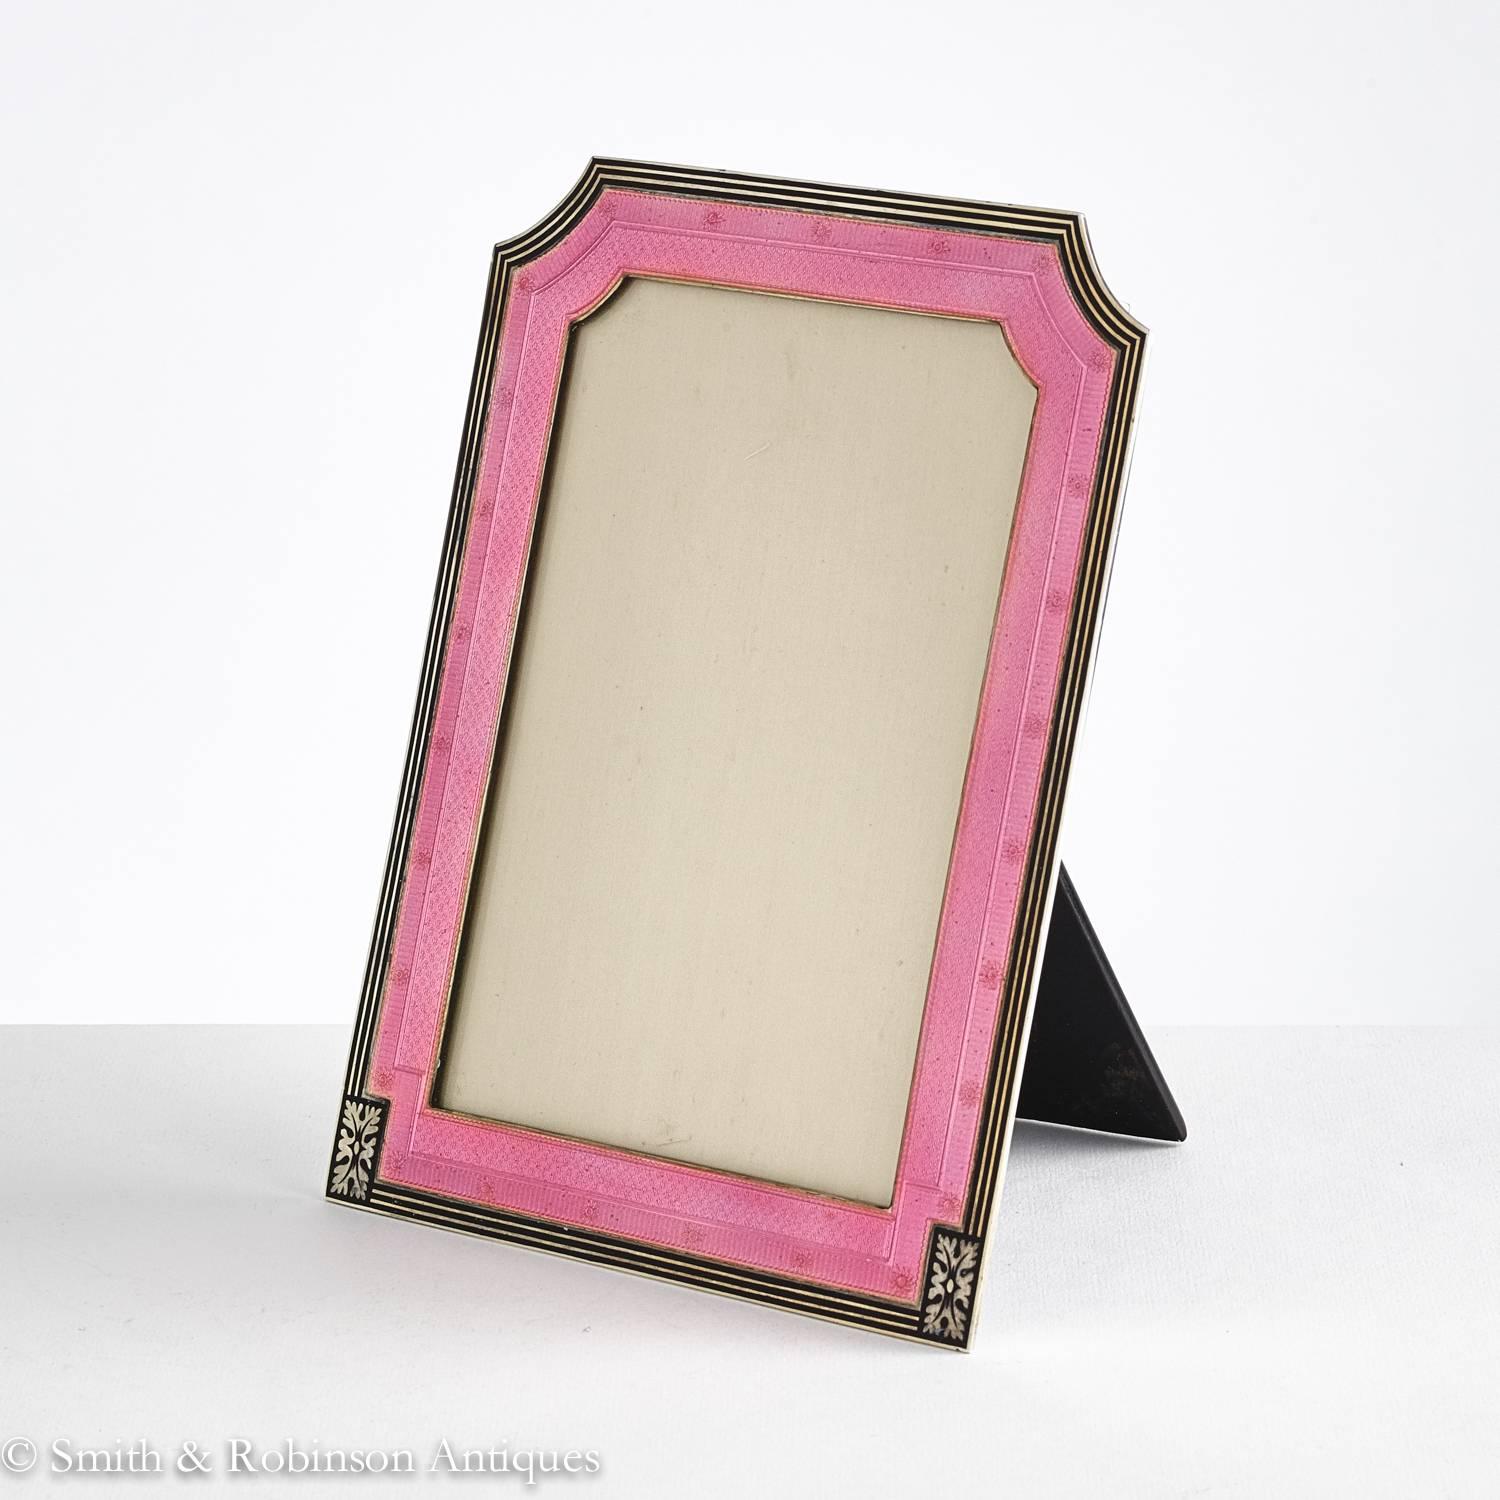 A stunning quality Art Deco silver and enamel photograph frame by maker Henry Mathews and dated Birmingham 1923.
The silver is cast and all the under decoration on the silver is very fine.
The pink enamel has a translucent sheen. 
The Leading